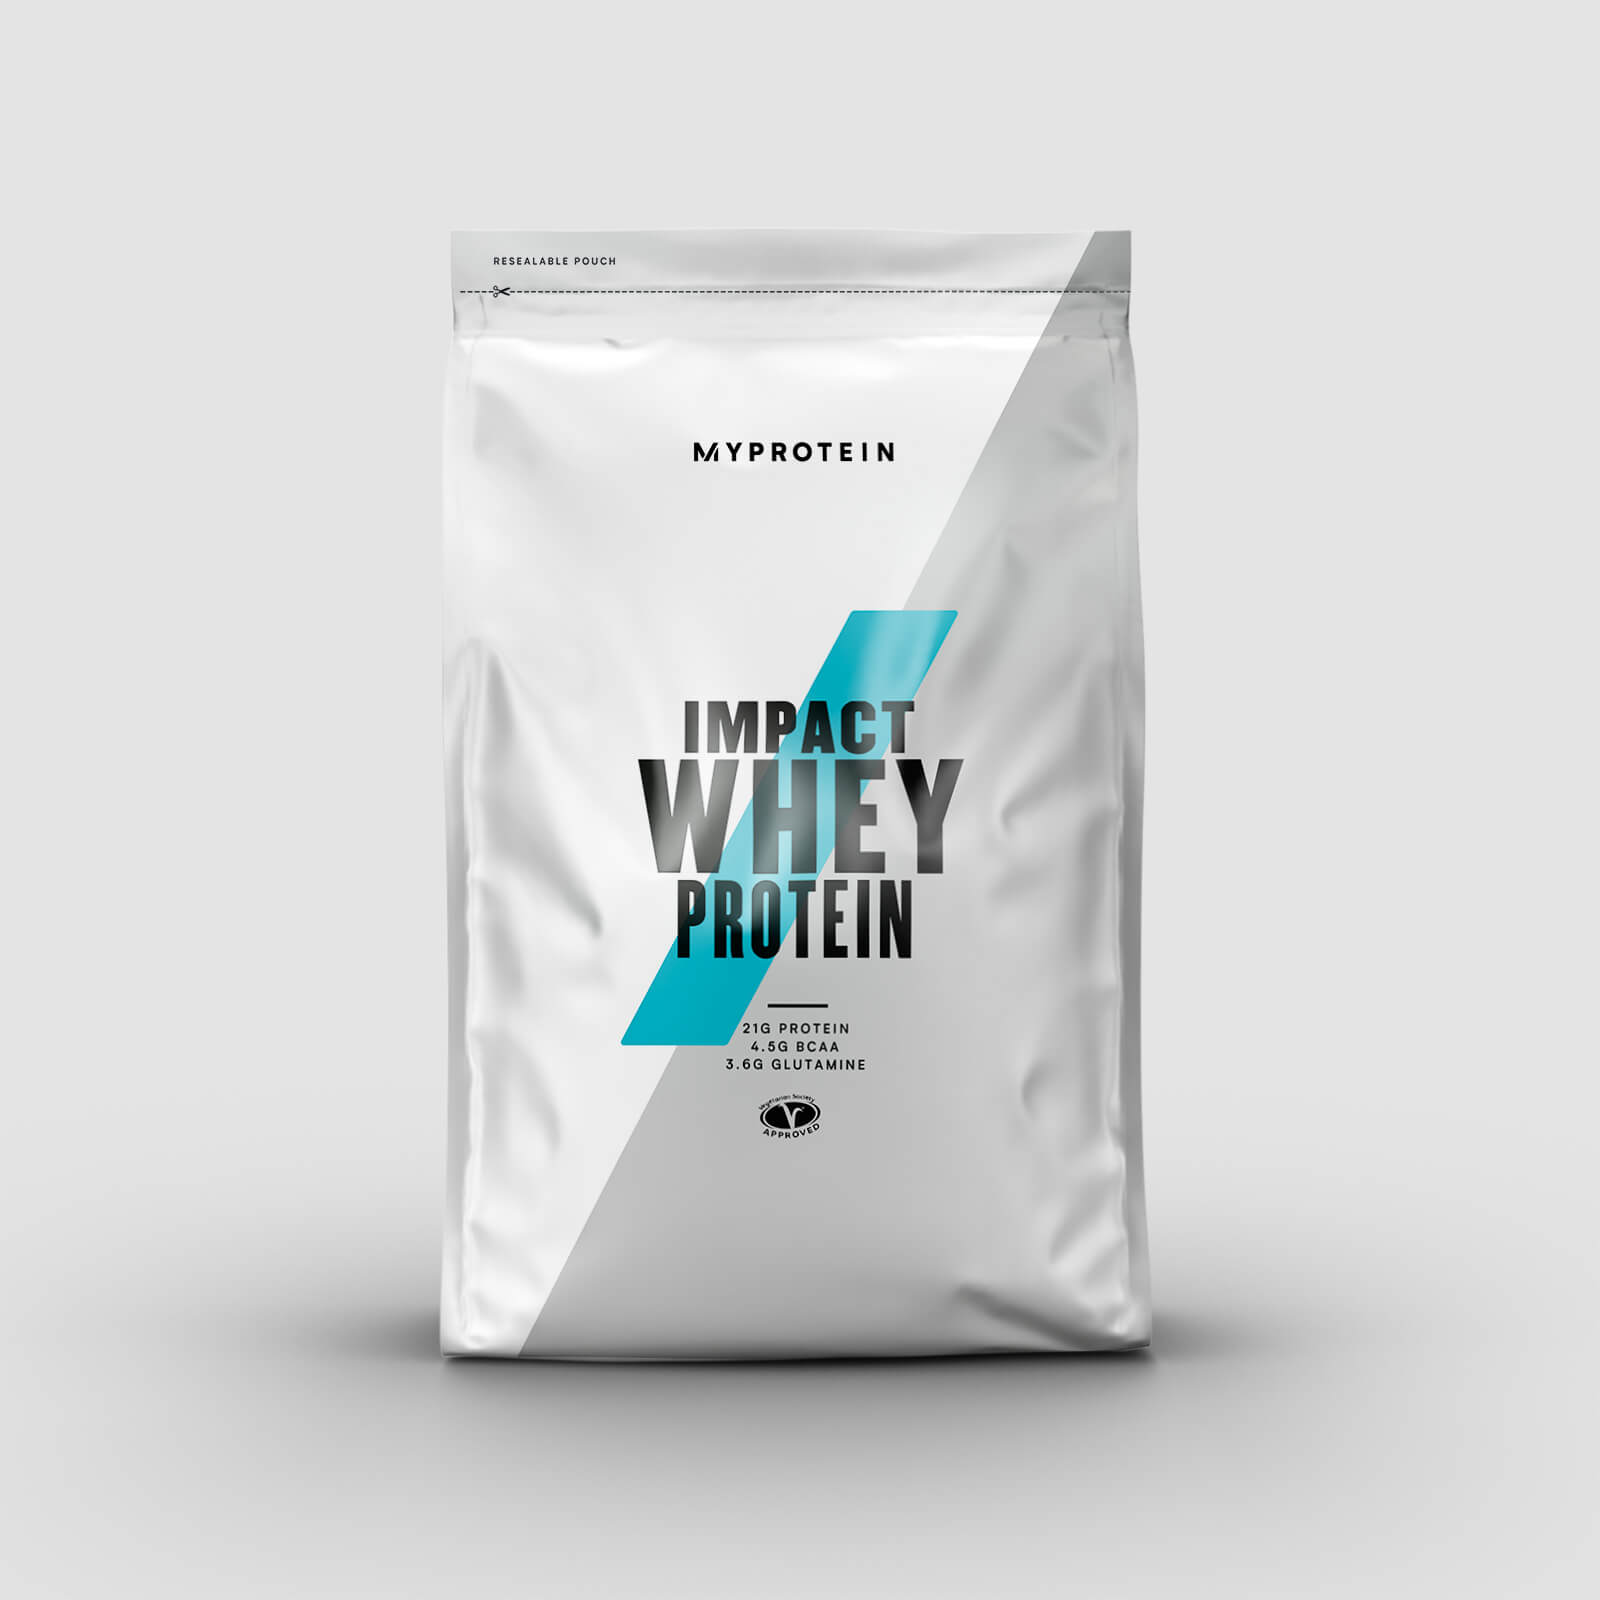 Myprotein Vassleprotein - Impact Whey Protein - 1kg - White Chocolate - New and Improved